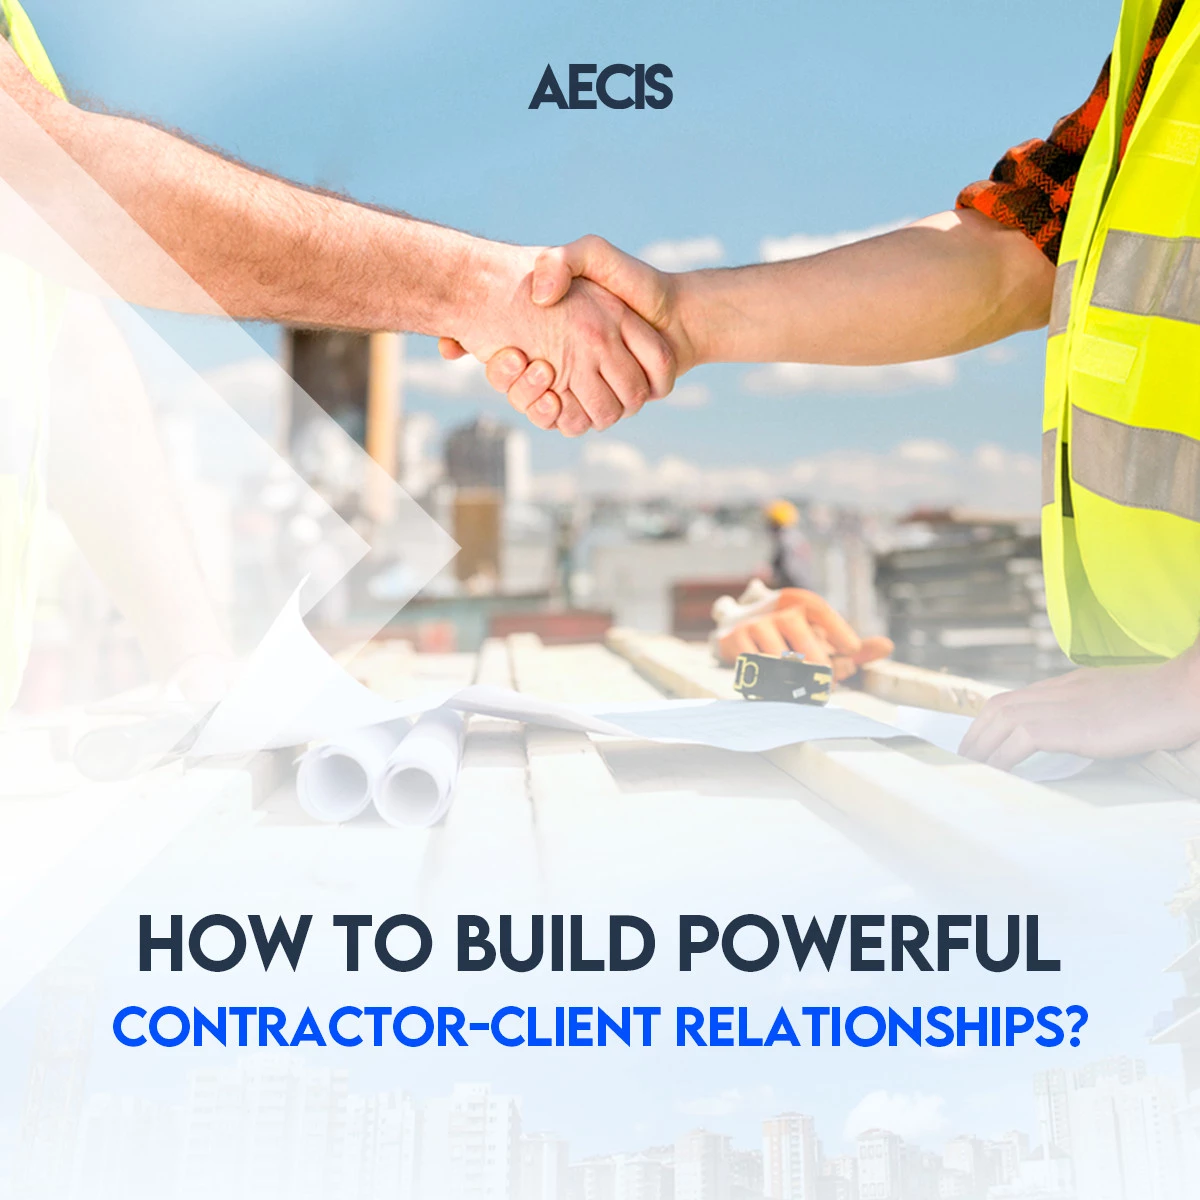 How to build powerful Contractor-Client relationships?